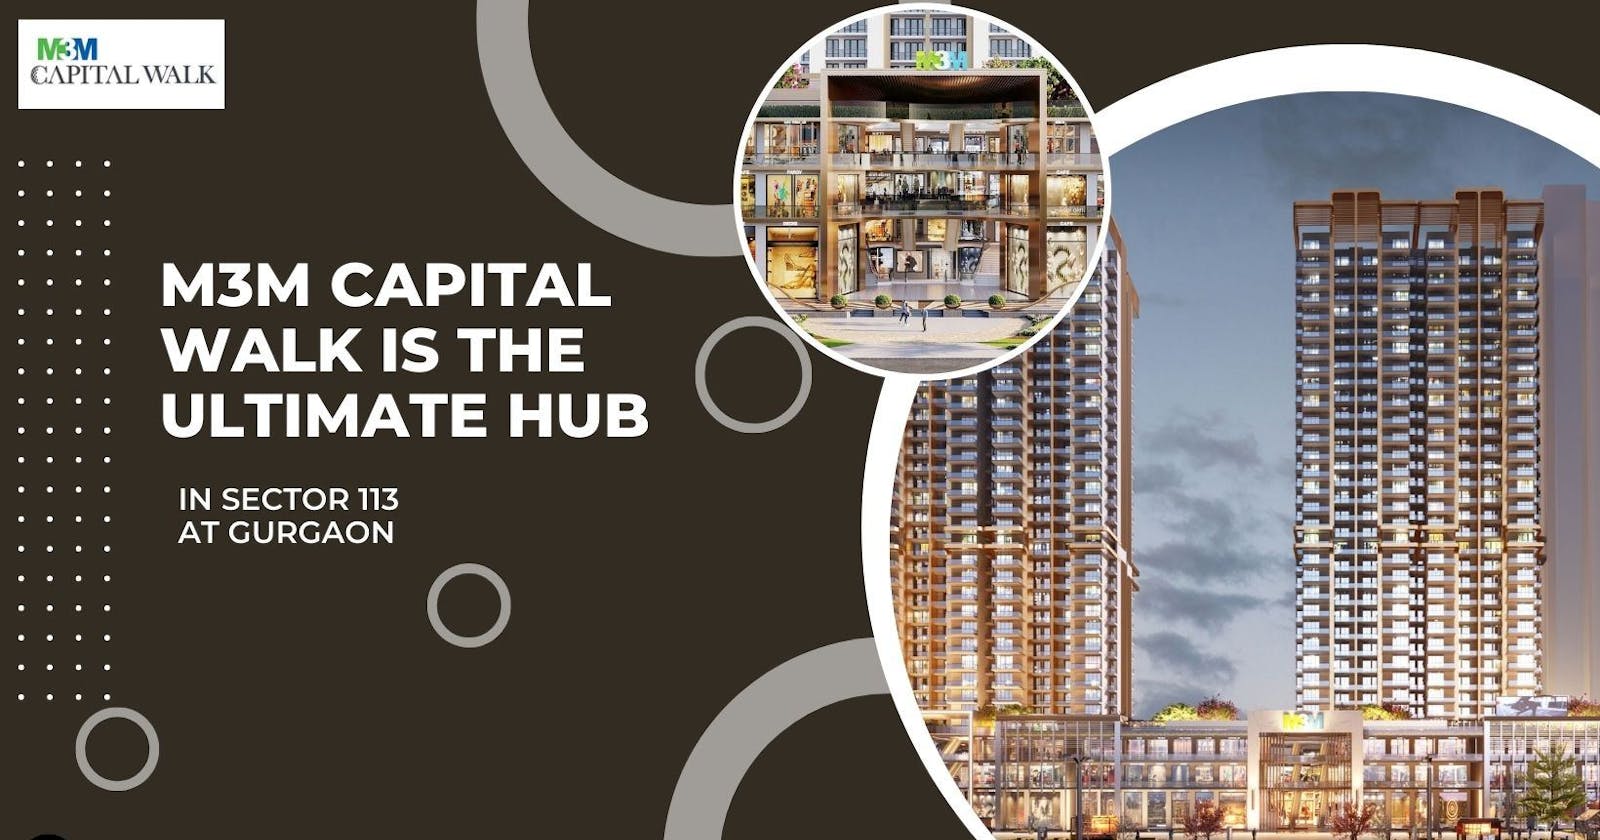 Why M3M Capital Walk is the Ultimate Hub for Retail and Commercial Investments.